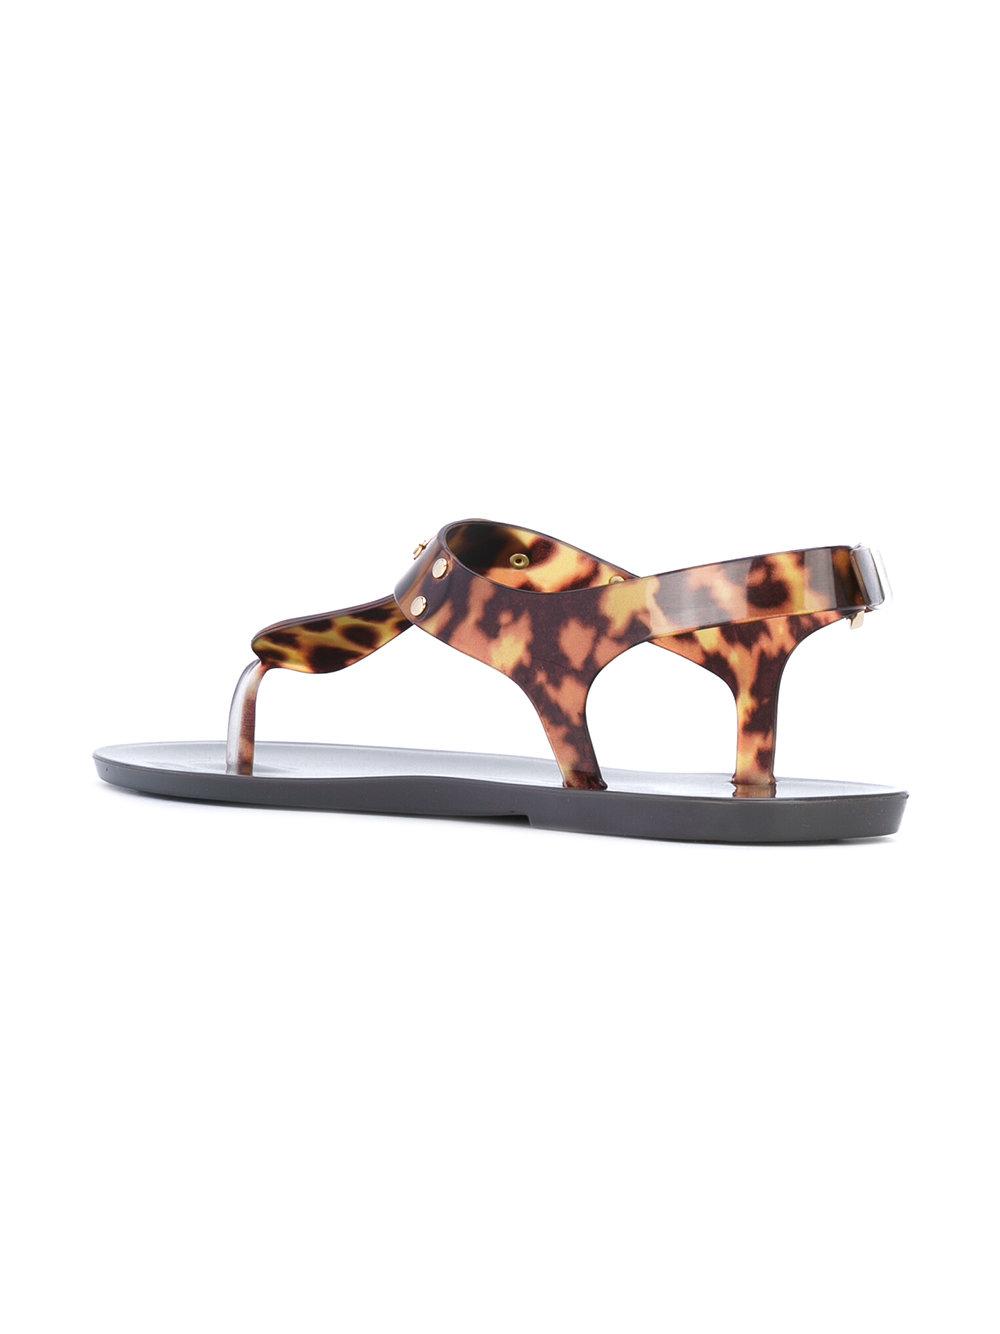 MICHAEL Michael Kors Leopard Jelly Sandals in Brown | Lyst